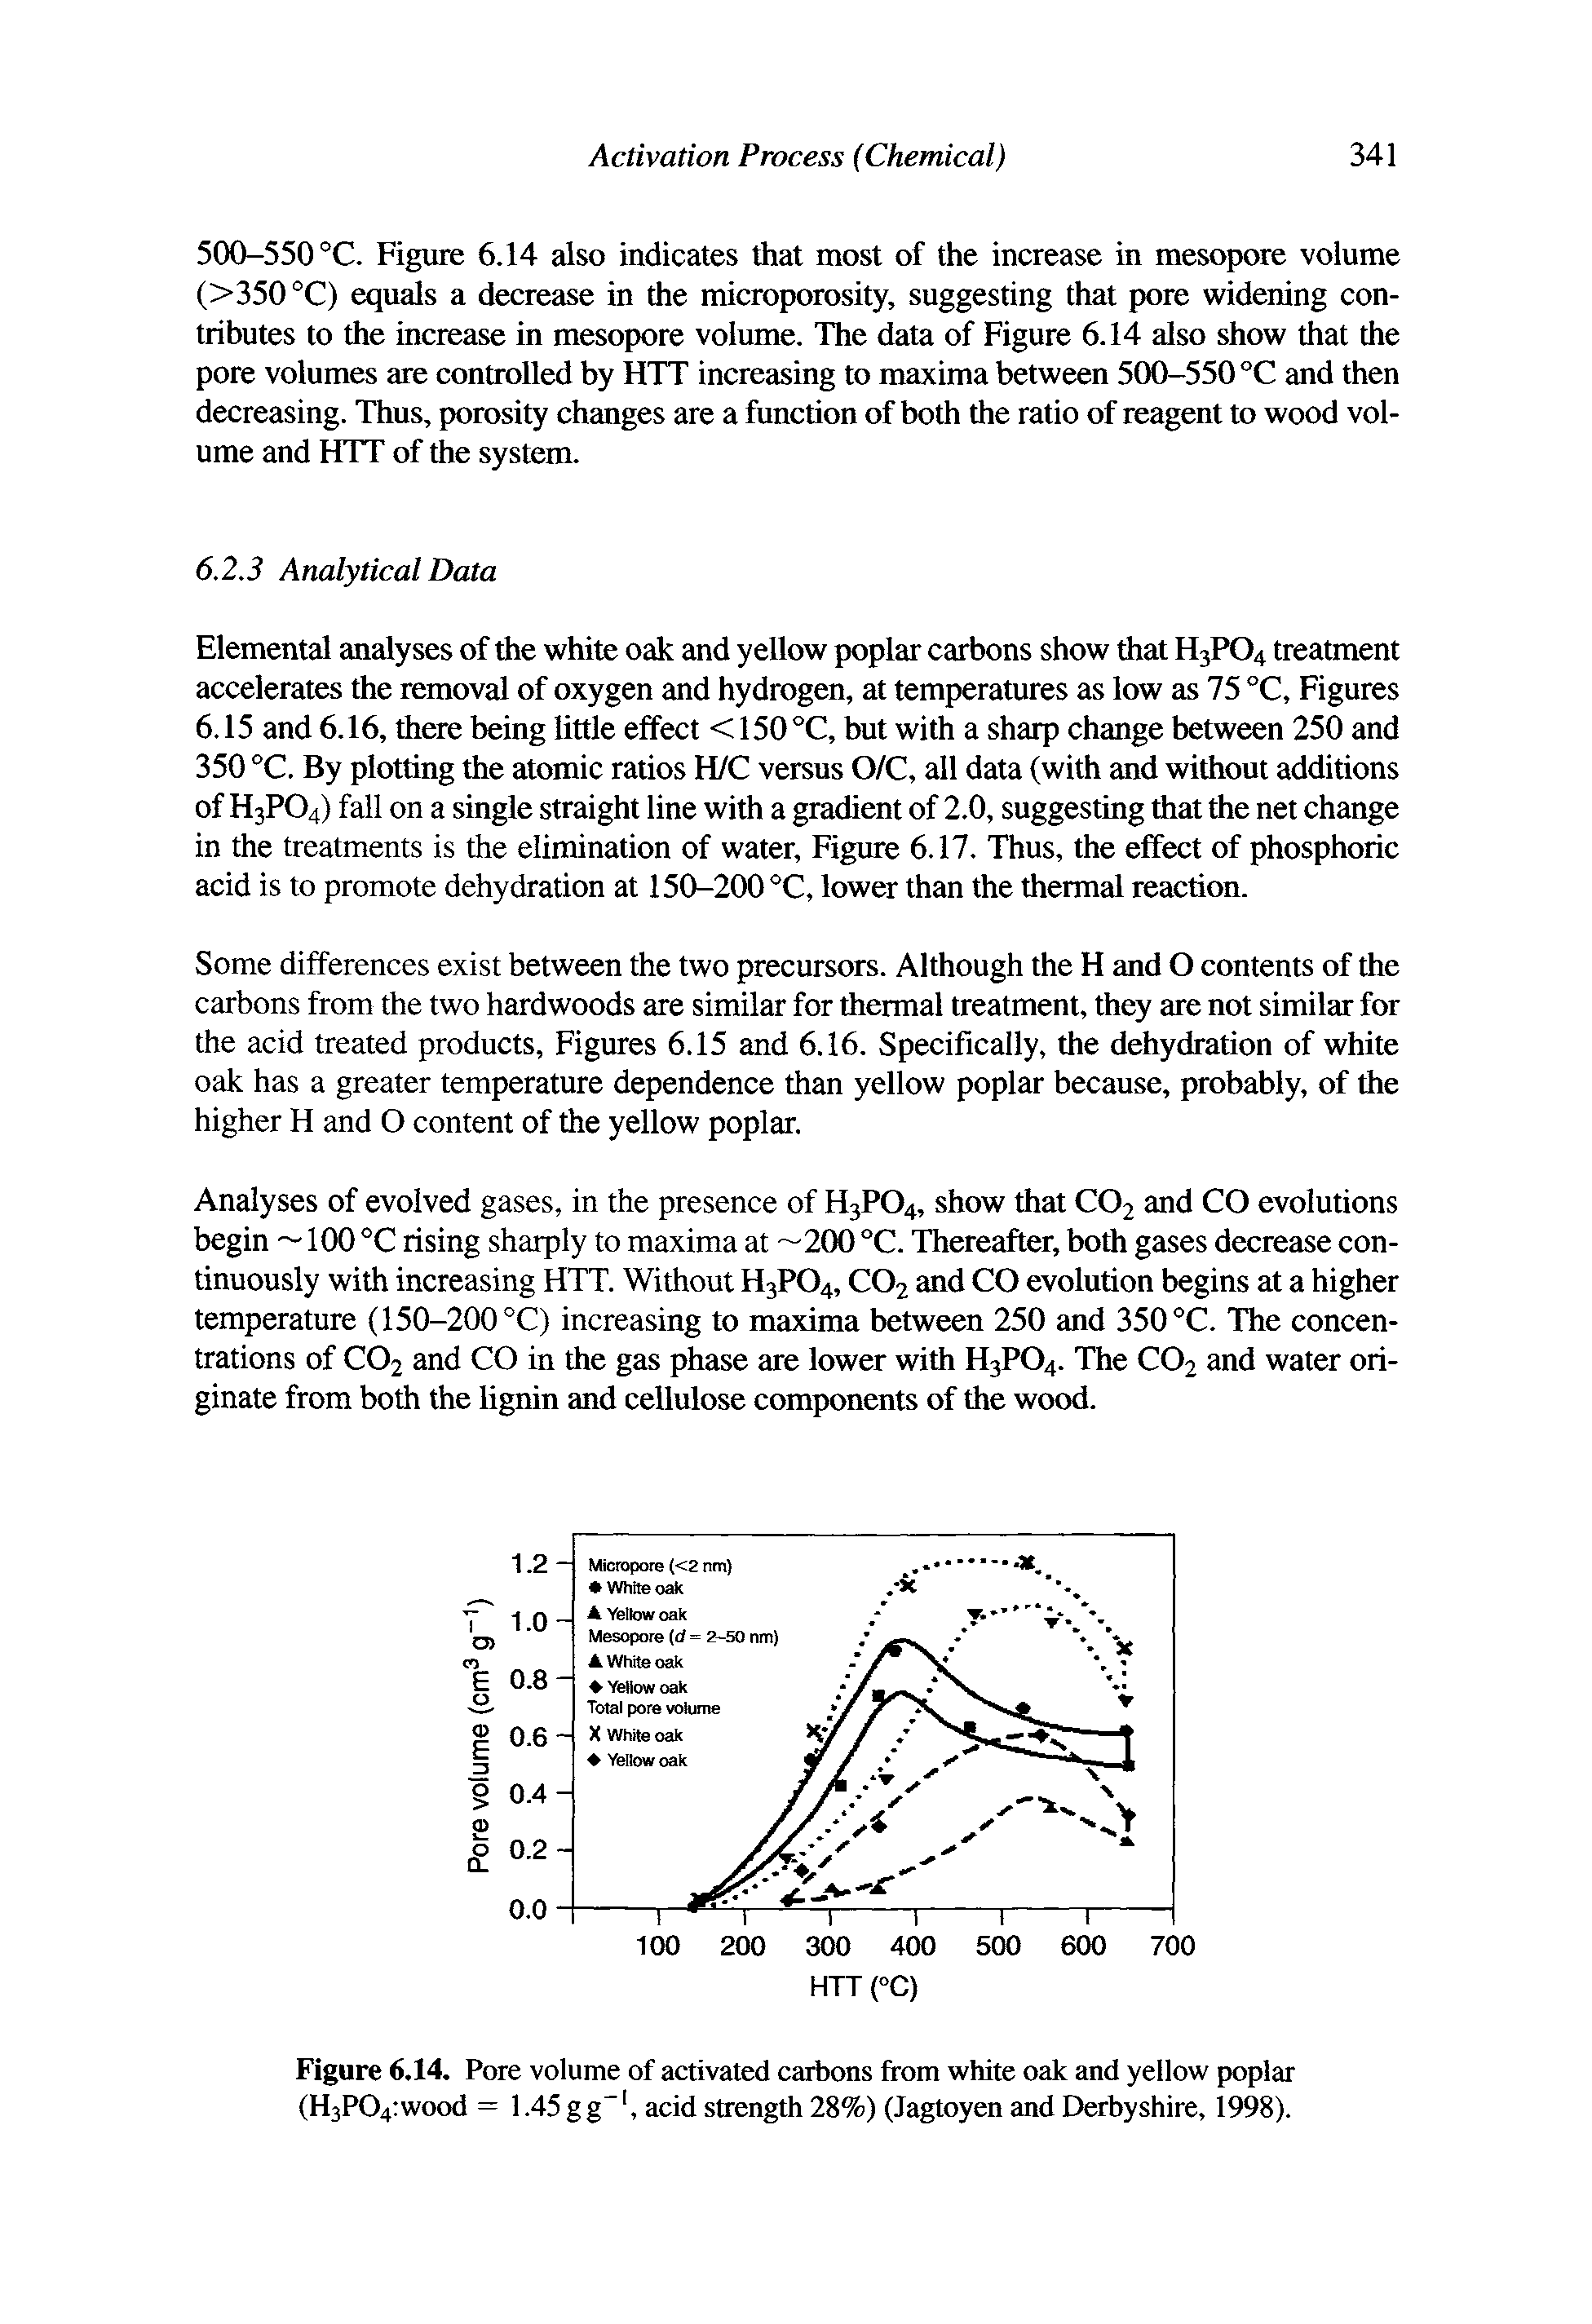 Figure 6.14. Pore volume of activated carbons from white oak and yellow poplar (H3PO4 wood = 1.45 g g", acid strength 28%) (Jagtoyen and Derbyshire, 1998).